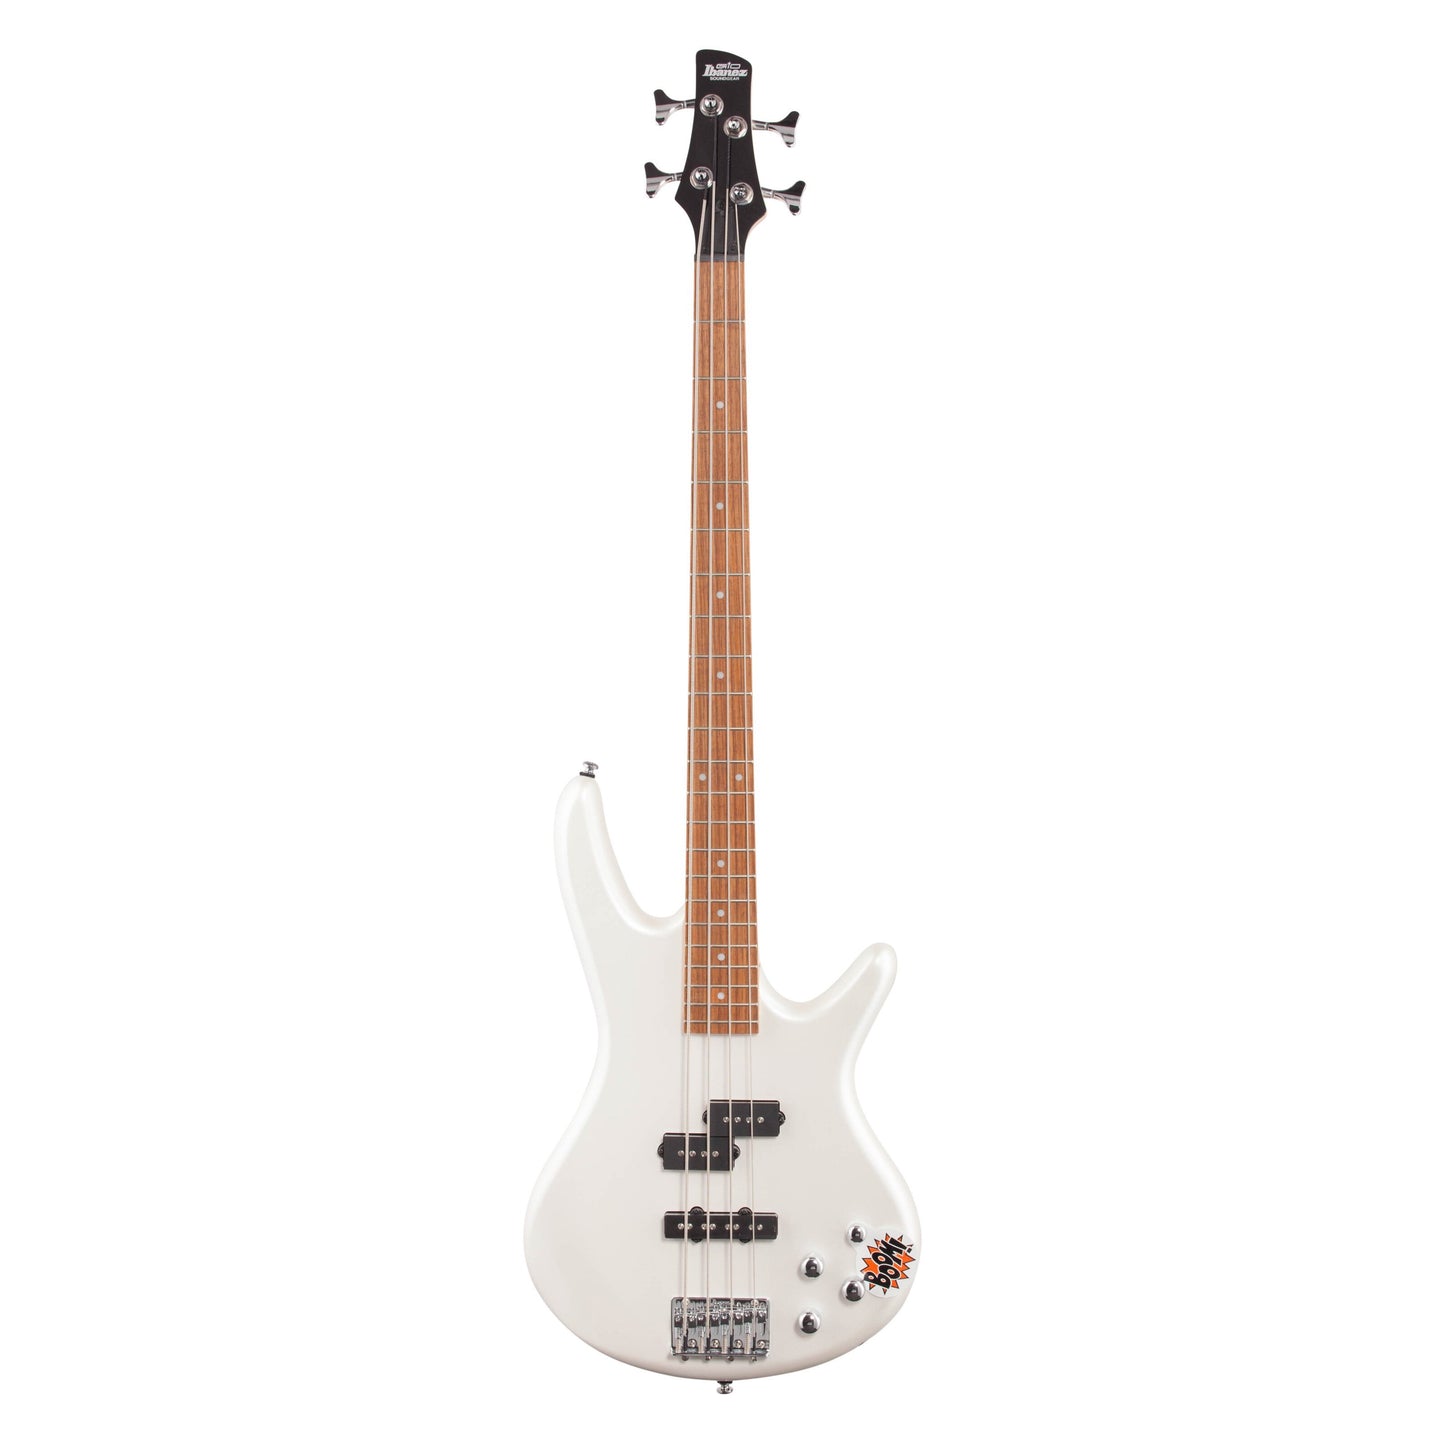 Ibanez GSR200 Electric Bass, Pearl White